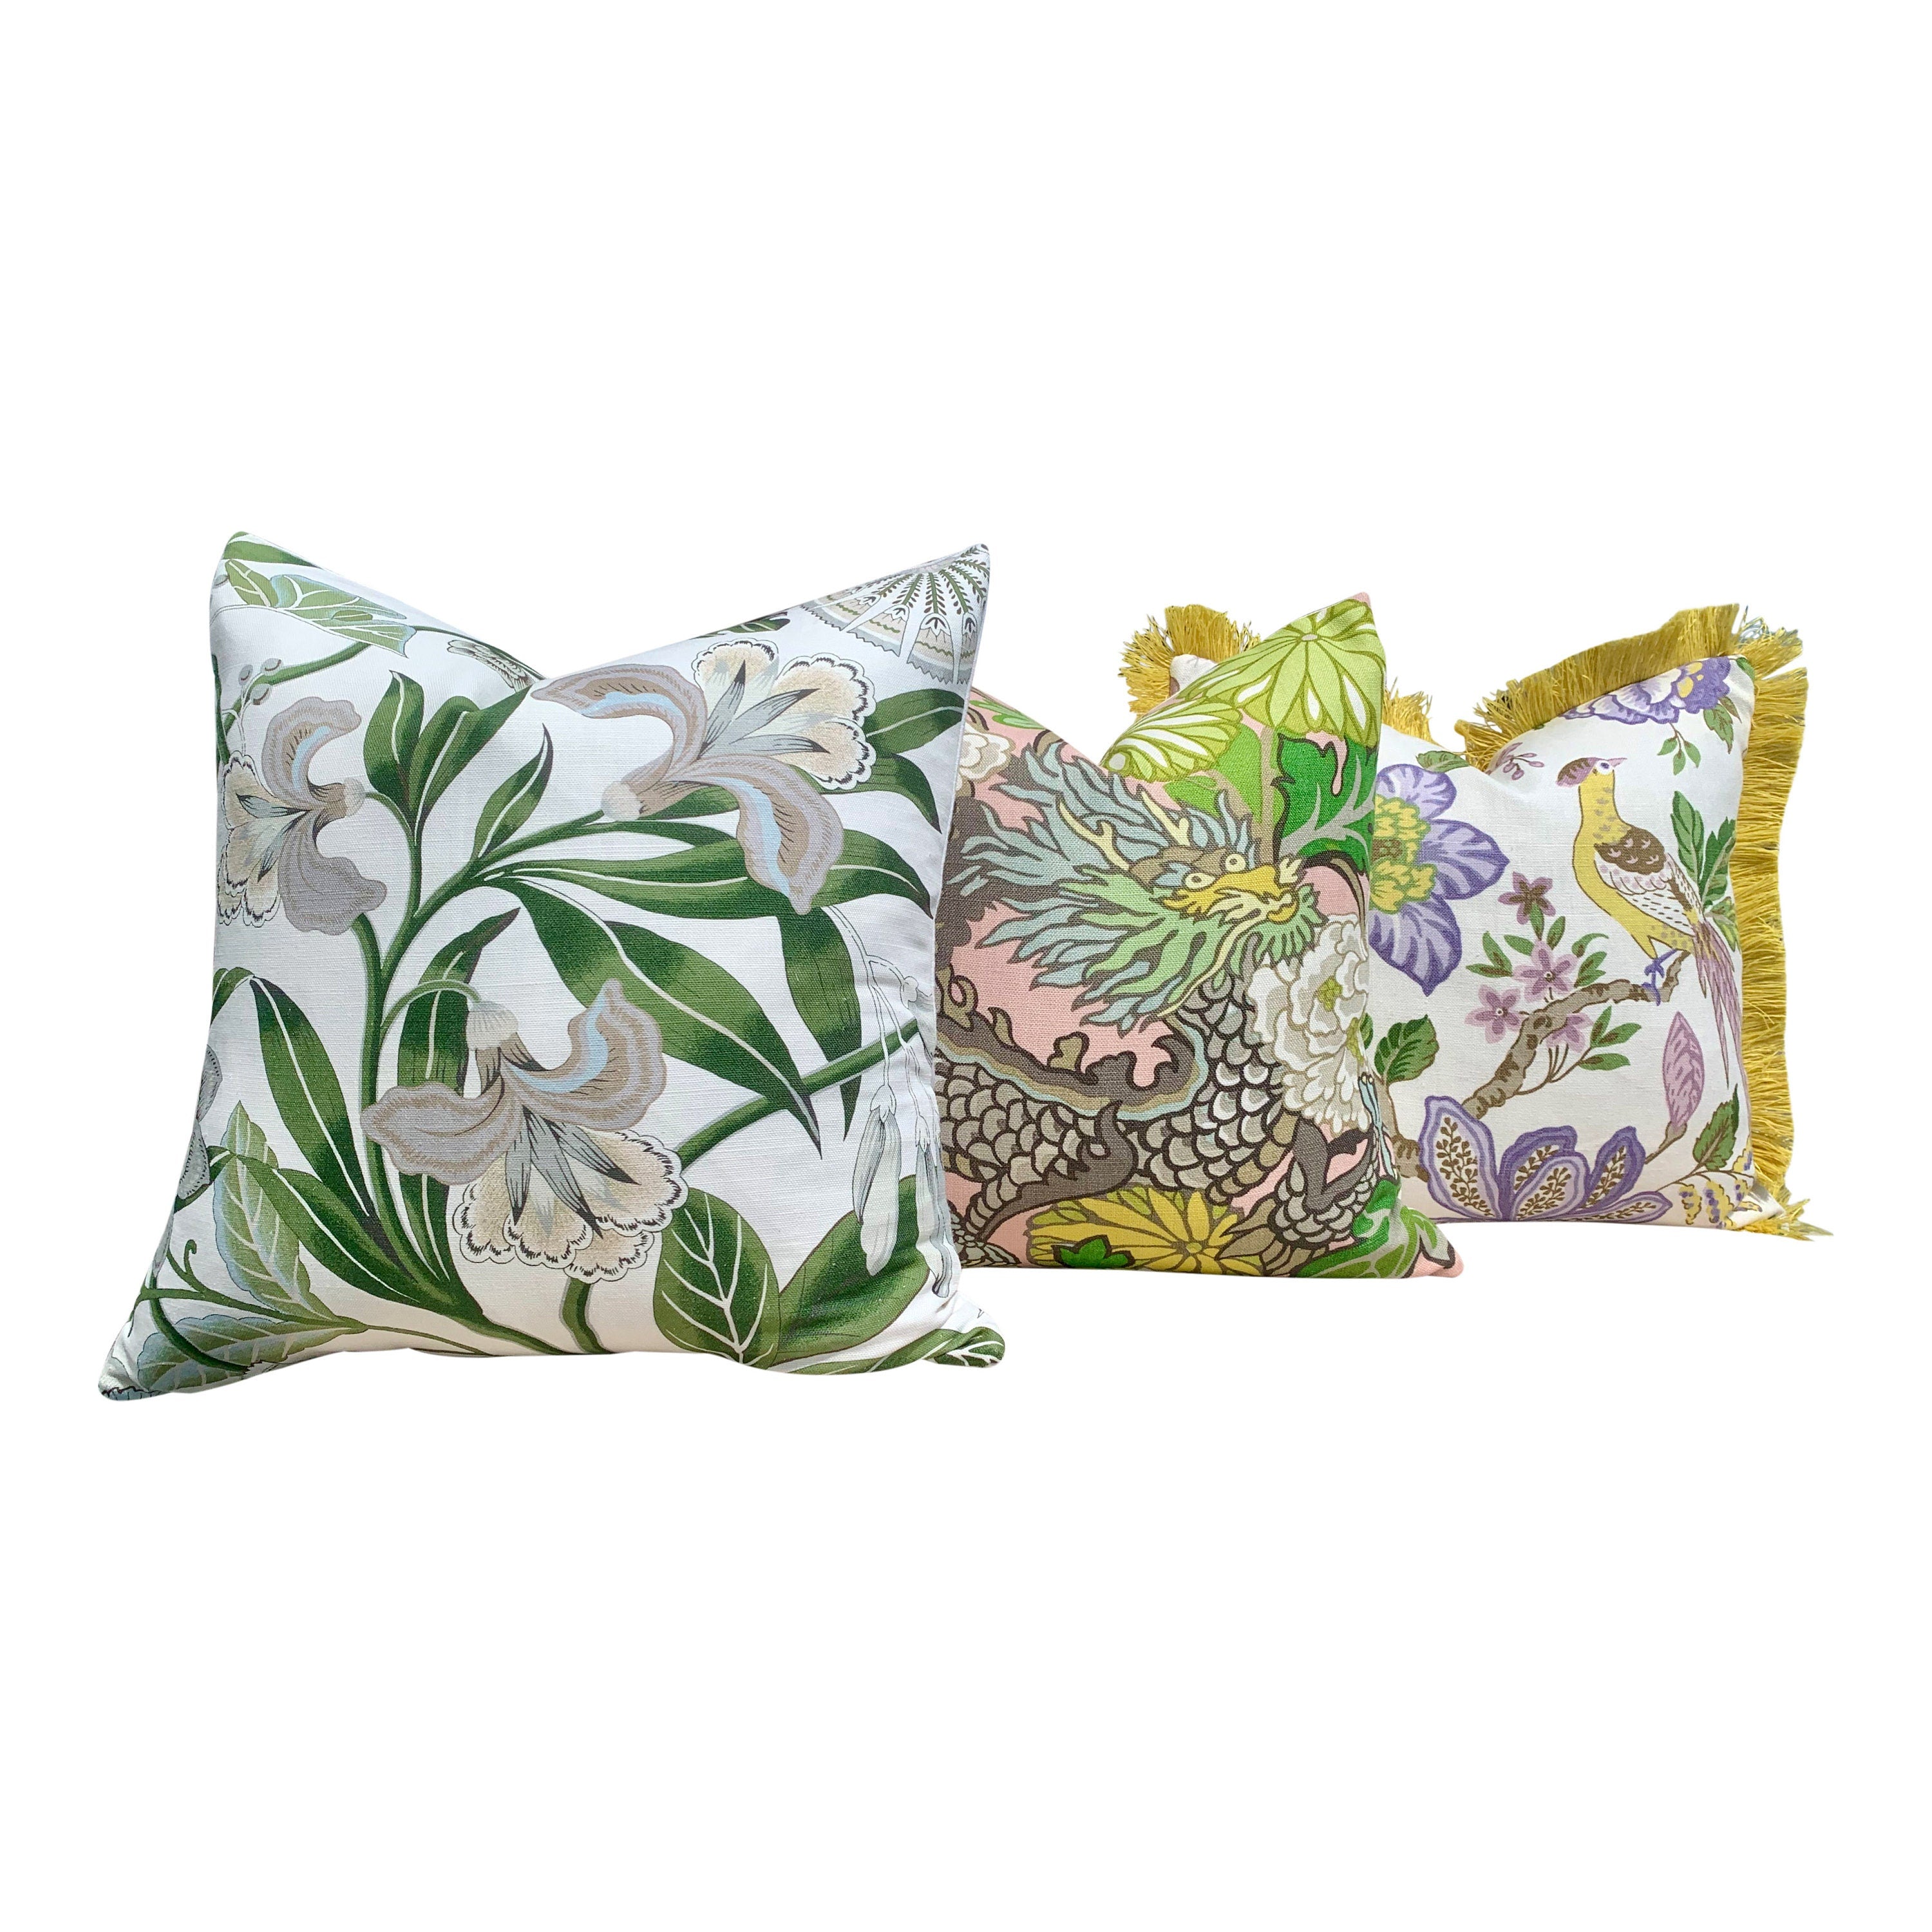 Thibaut Cleo Floral Pillow in Green and White. Decorative Lumbar Pillow in Green. Accent Throw Pillow.